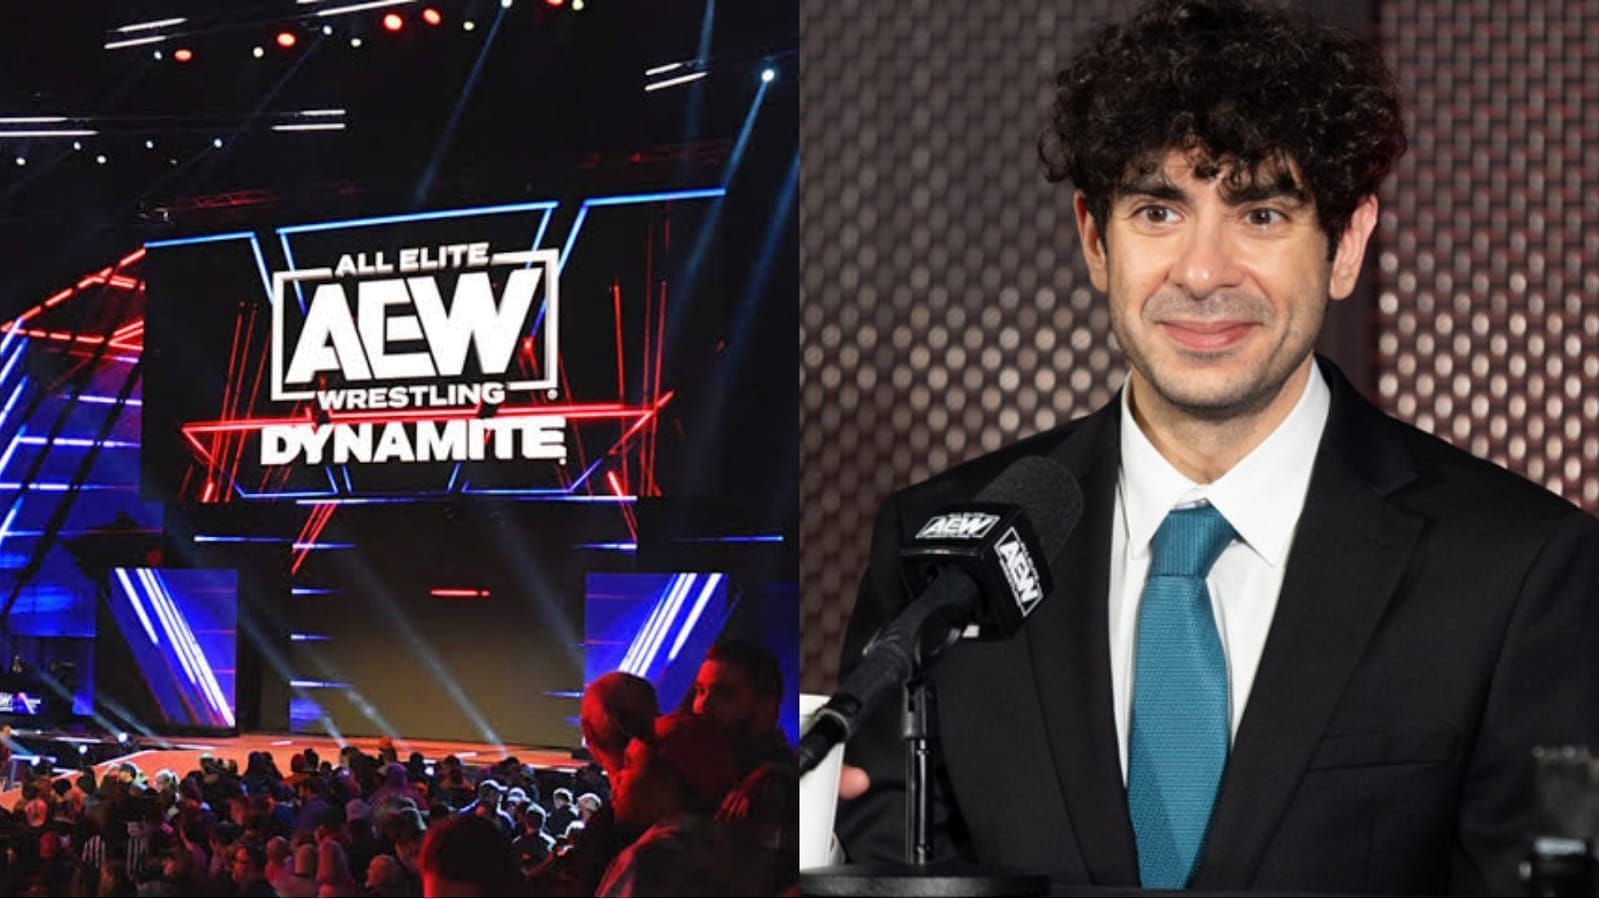 Tony Khan is known for signing huge personalities in AEW